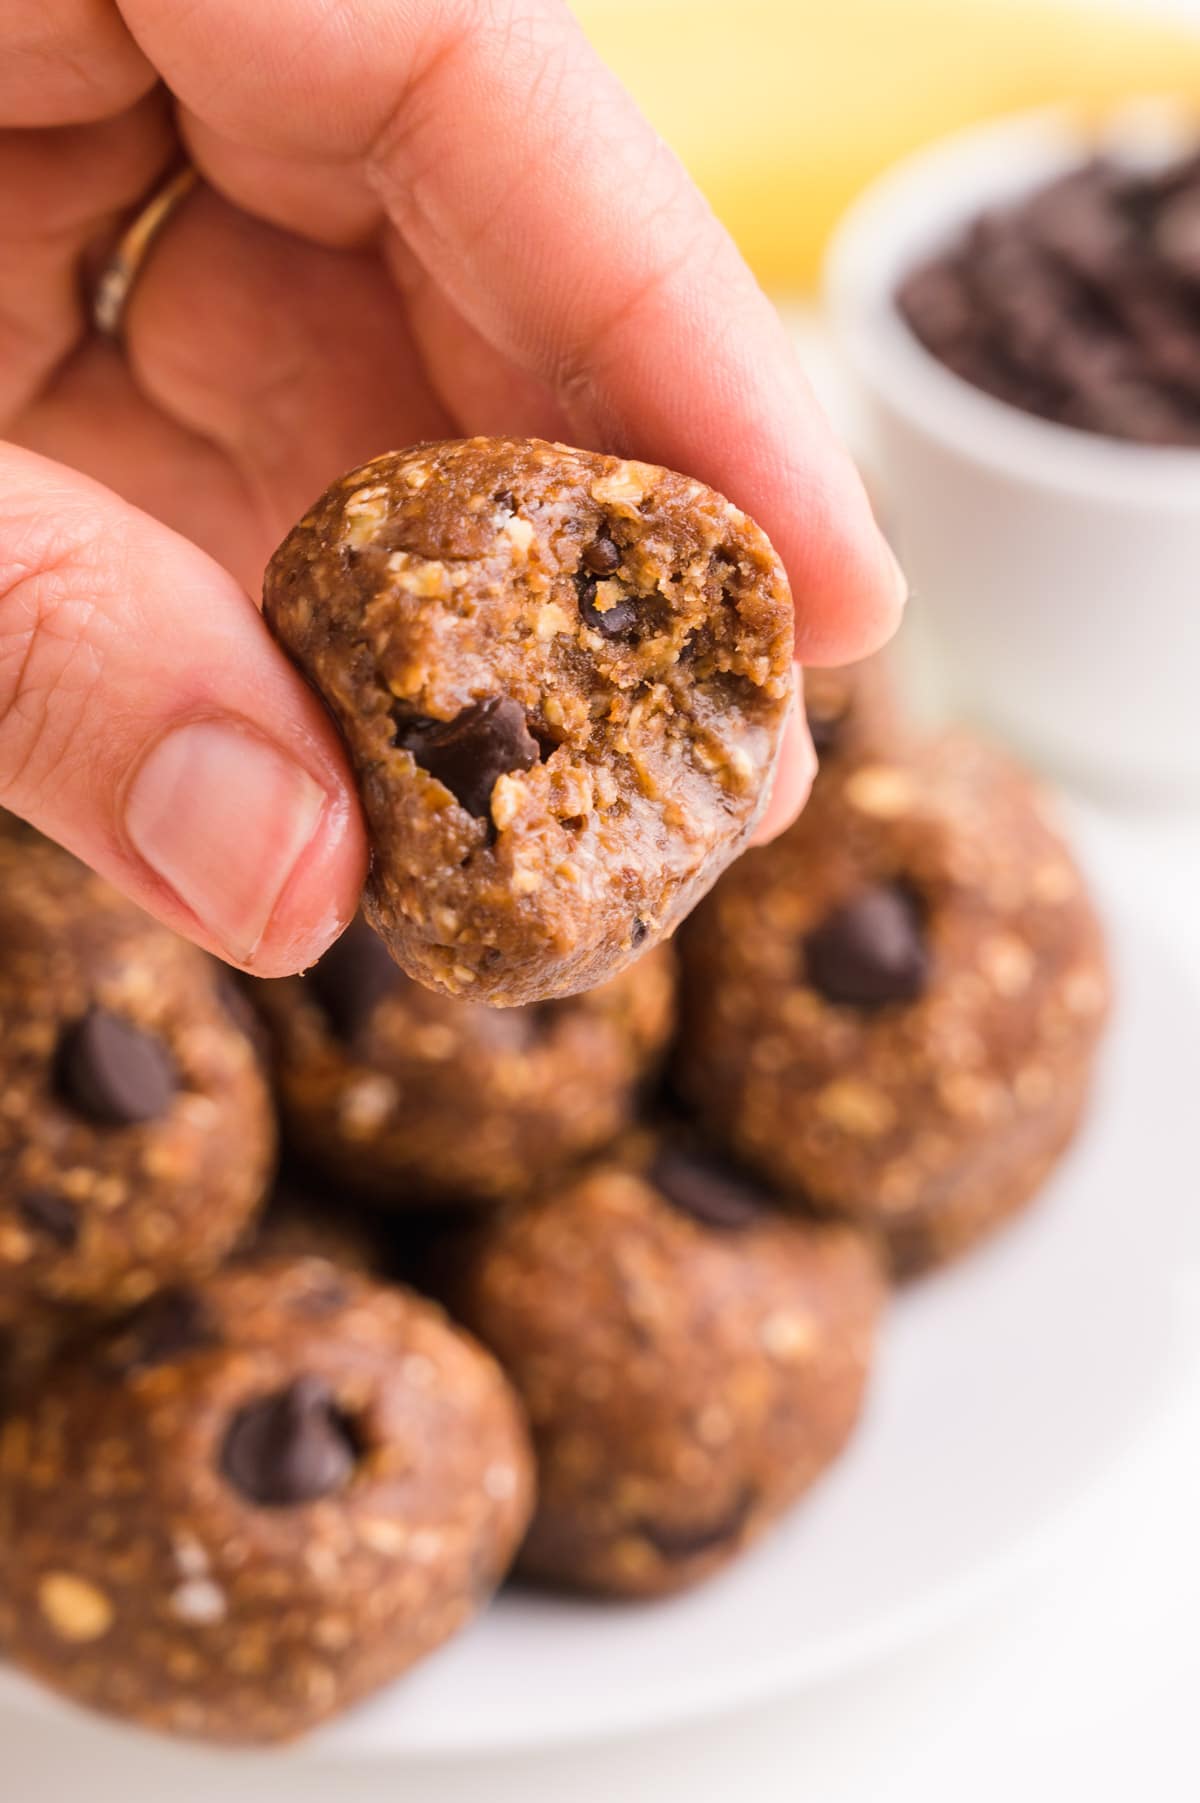 A hand holding a banana protein ball and taking a bite.  There are more in the background, including chocolate chips and bananas.